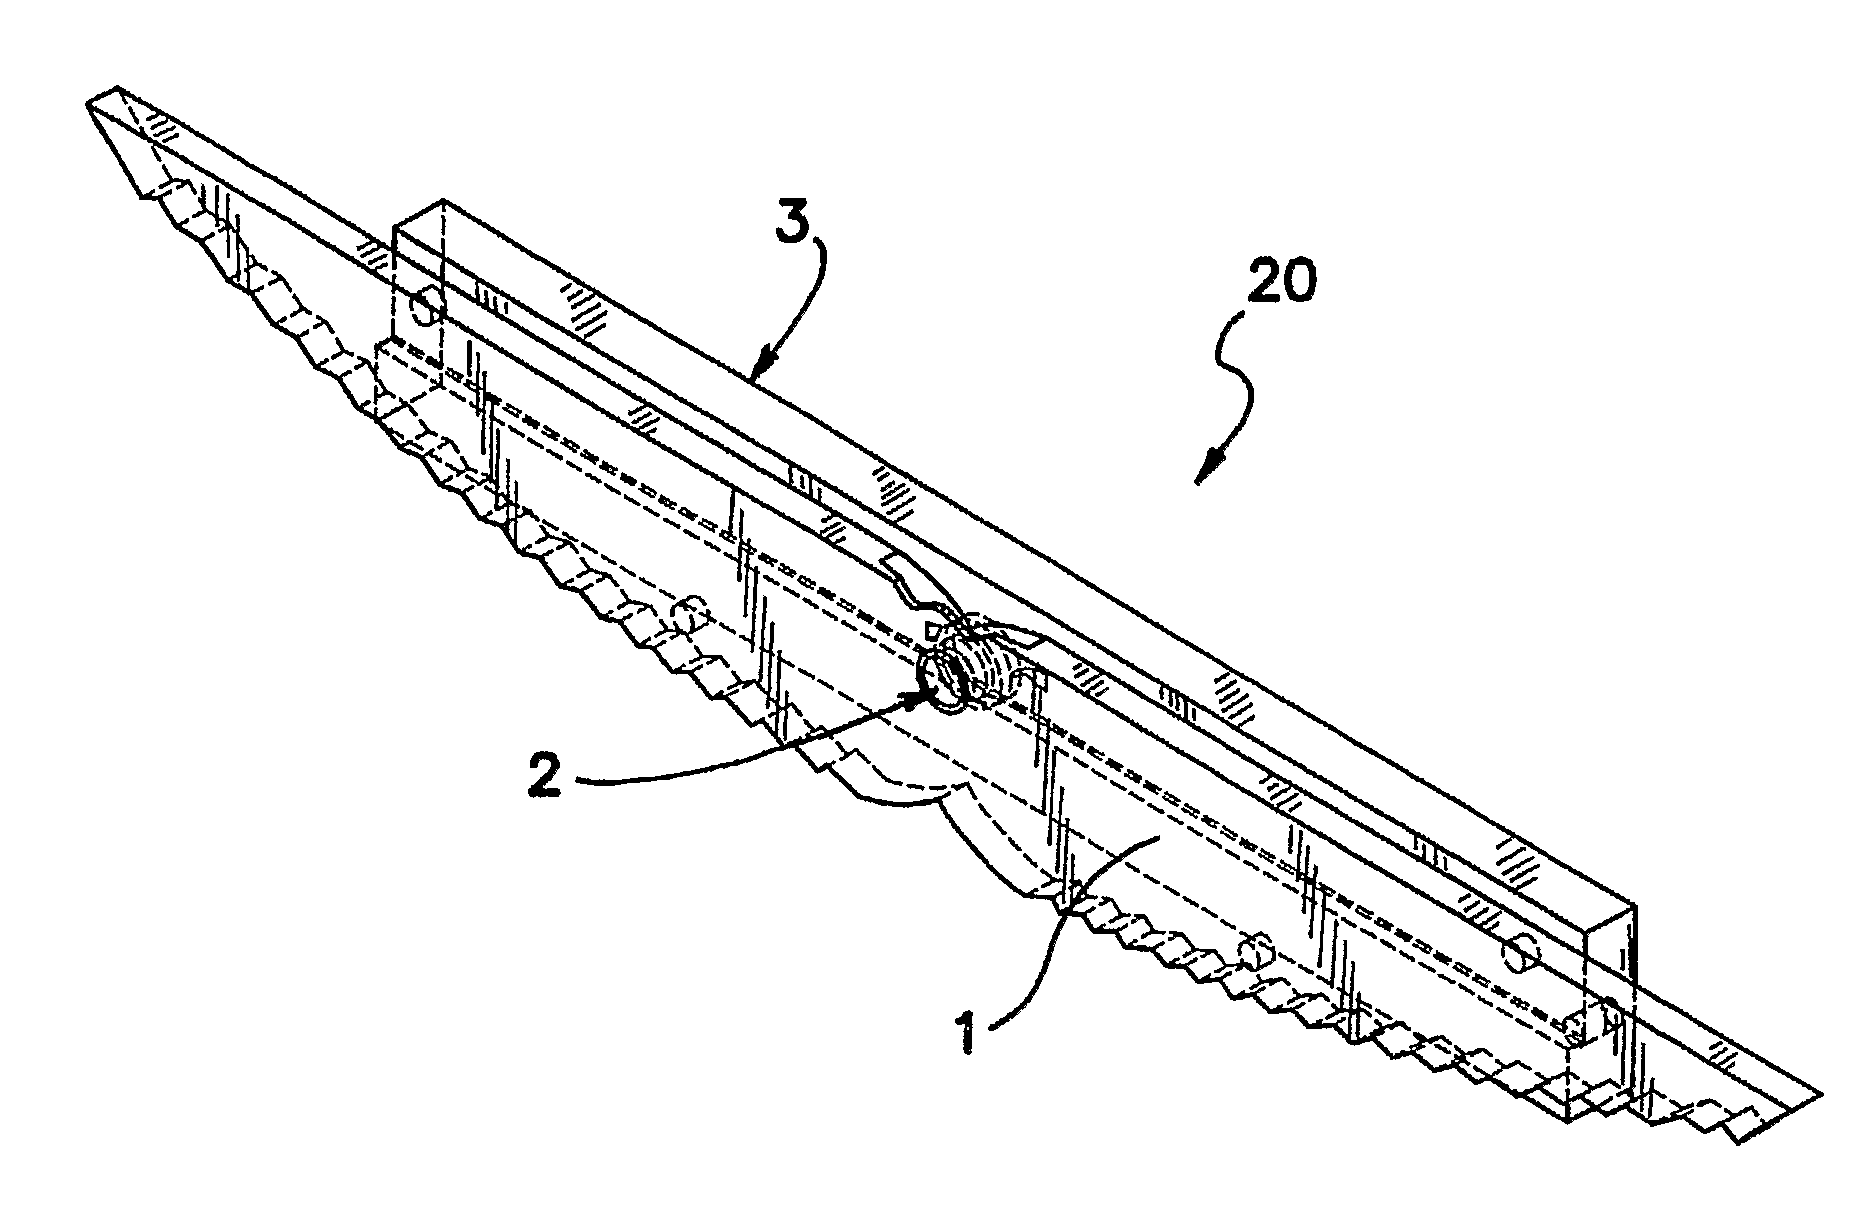 Apparatus and method of using an LED light source to generate an efficient, narrow, high-aspect ratio light pattern